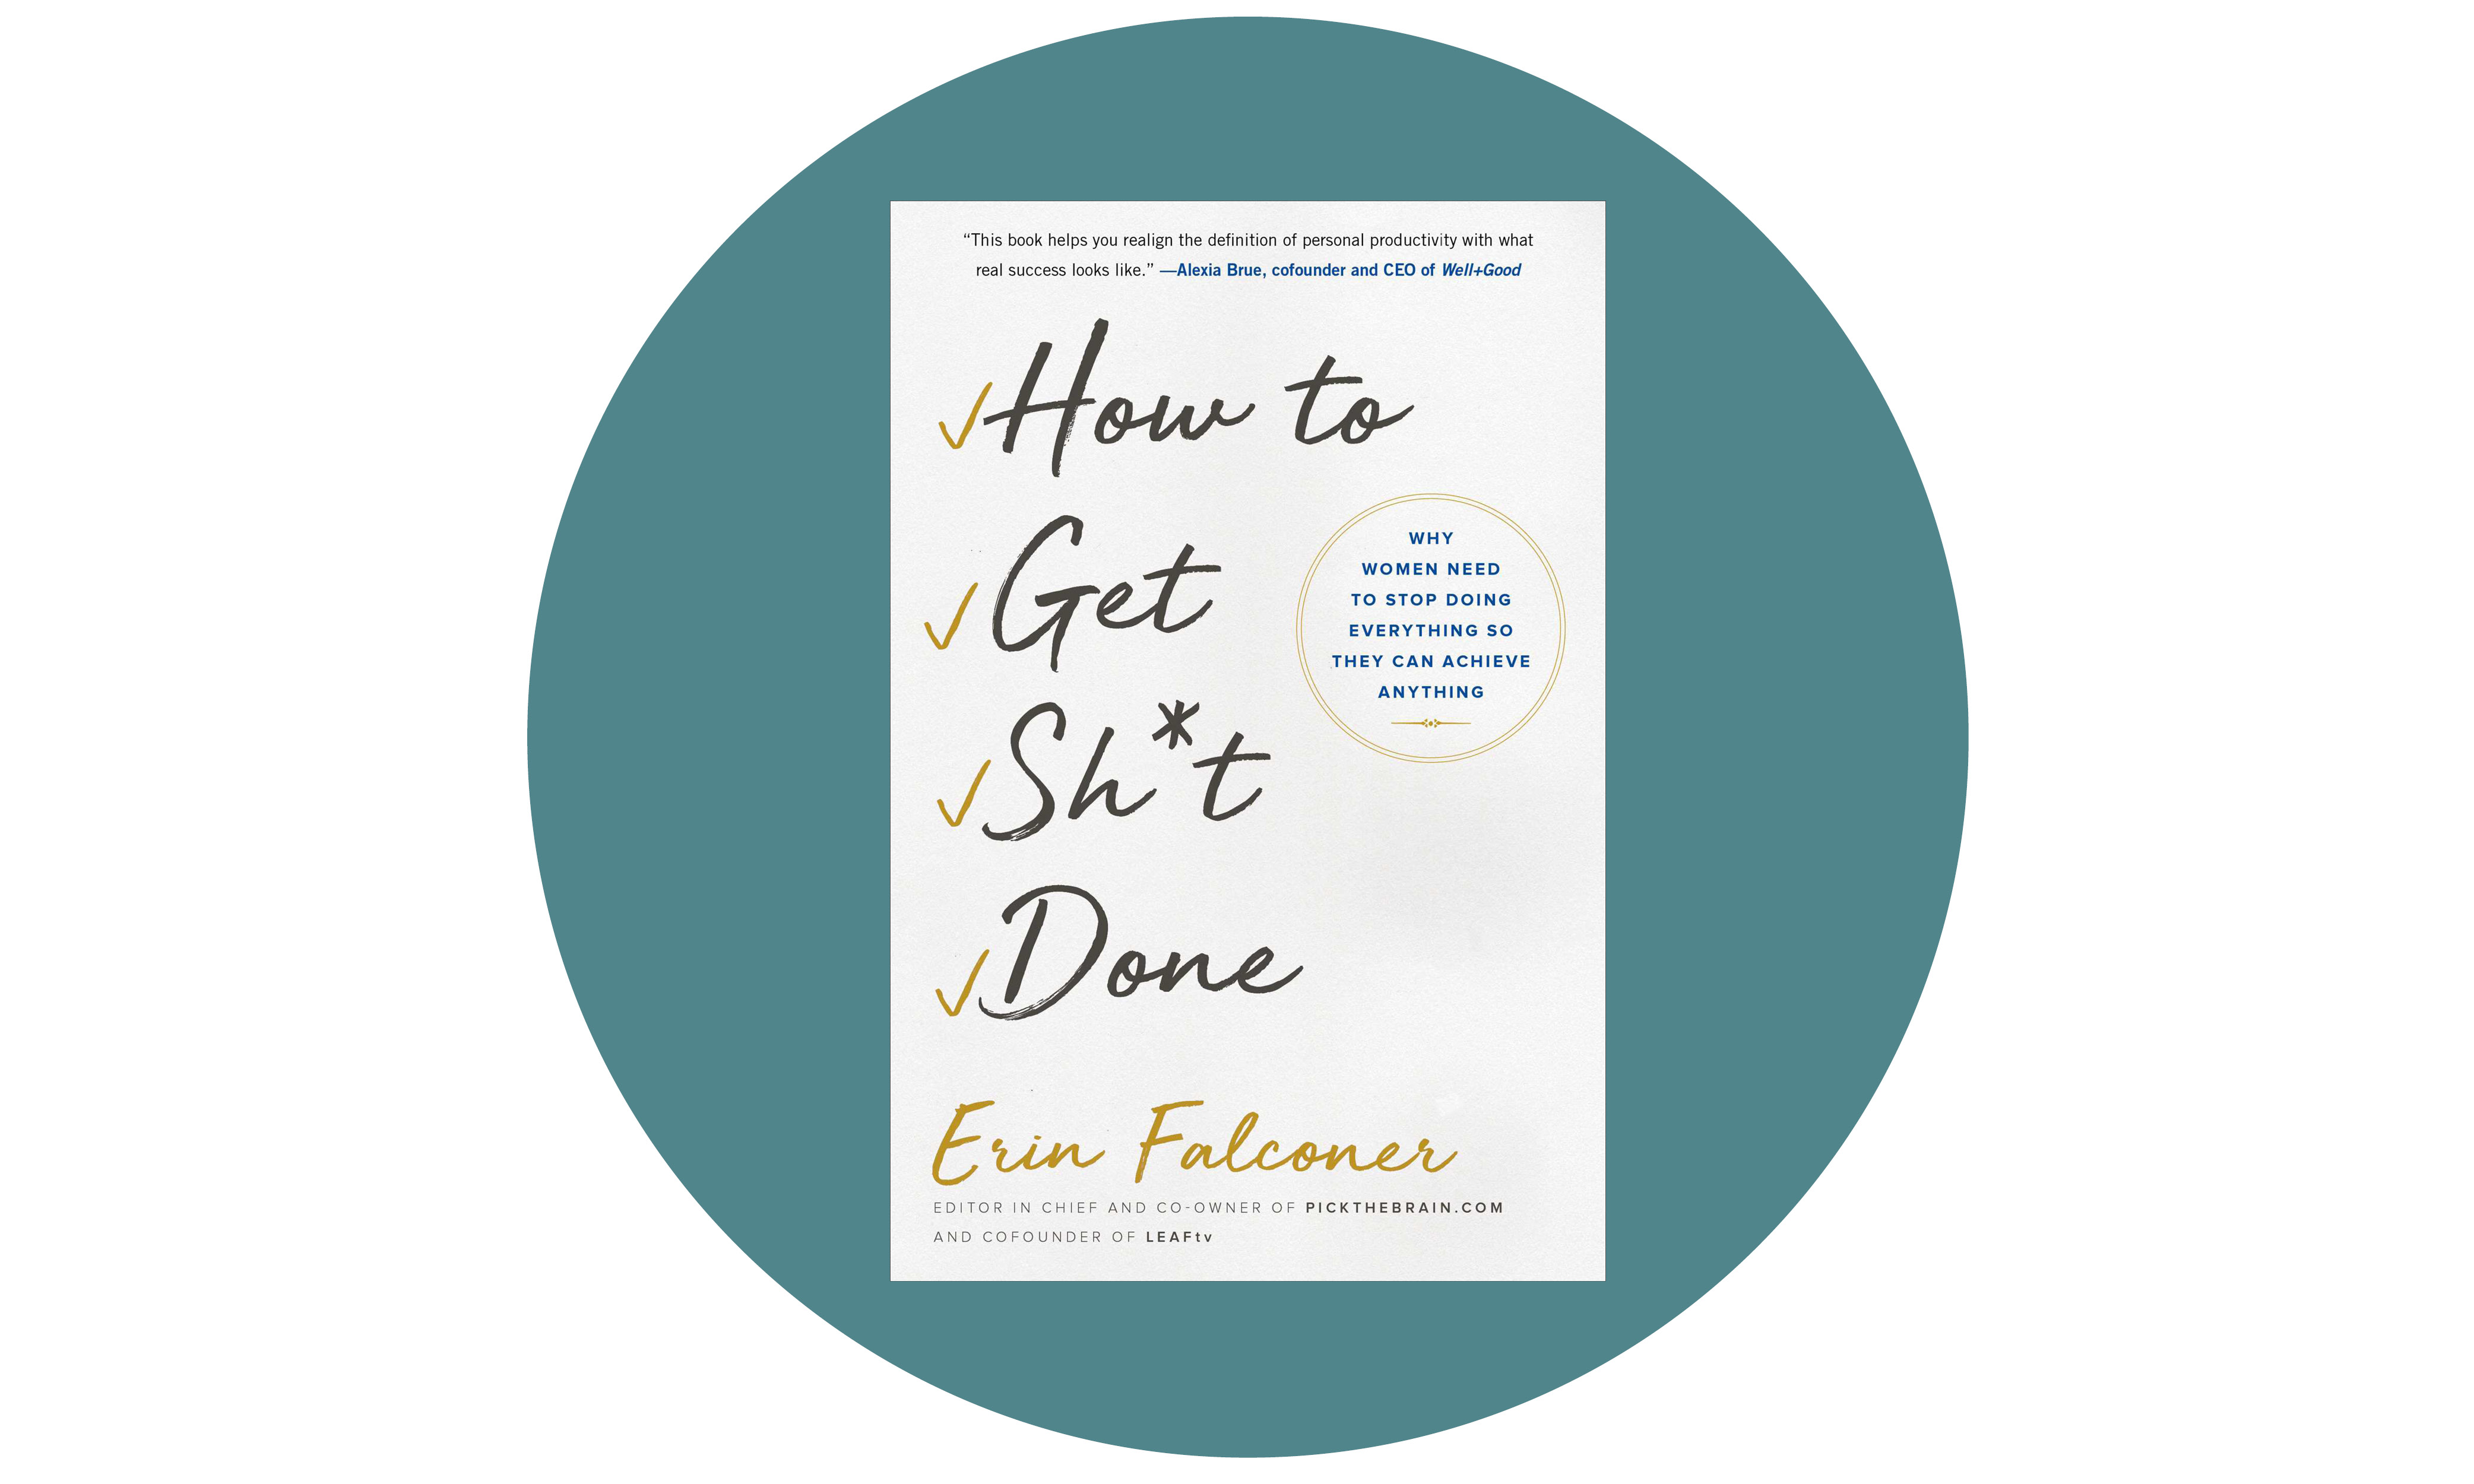 How to Get Sh*t Done: Why Women Need to Stop Doing Everything so They Can Achieve Anything by Erin Falconer (Gallery Books, 2018) It’s widely accepted wisdom that one has to spend money to make money. Could it also be true that in order to speed up, we should start by slowing down? Erin Falconer says yes, and in her debut book, this founder of self-improvement site Pick the Brain explains that the trick is identifying the three areas of your life you want to excel at, focusing on those and outsourcing the rest. Perfectionists take note: learning to say IDGAF — and actually mean it — will change everything.